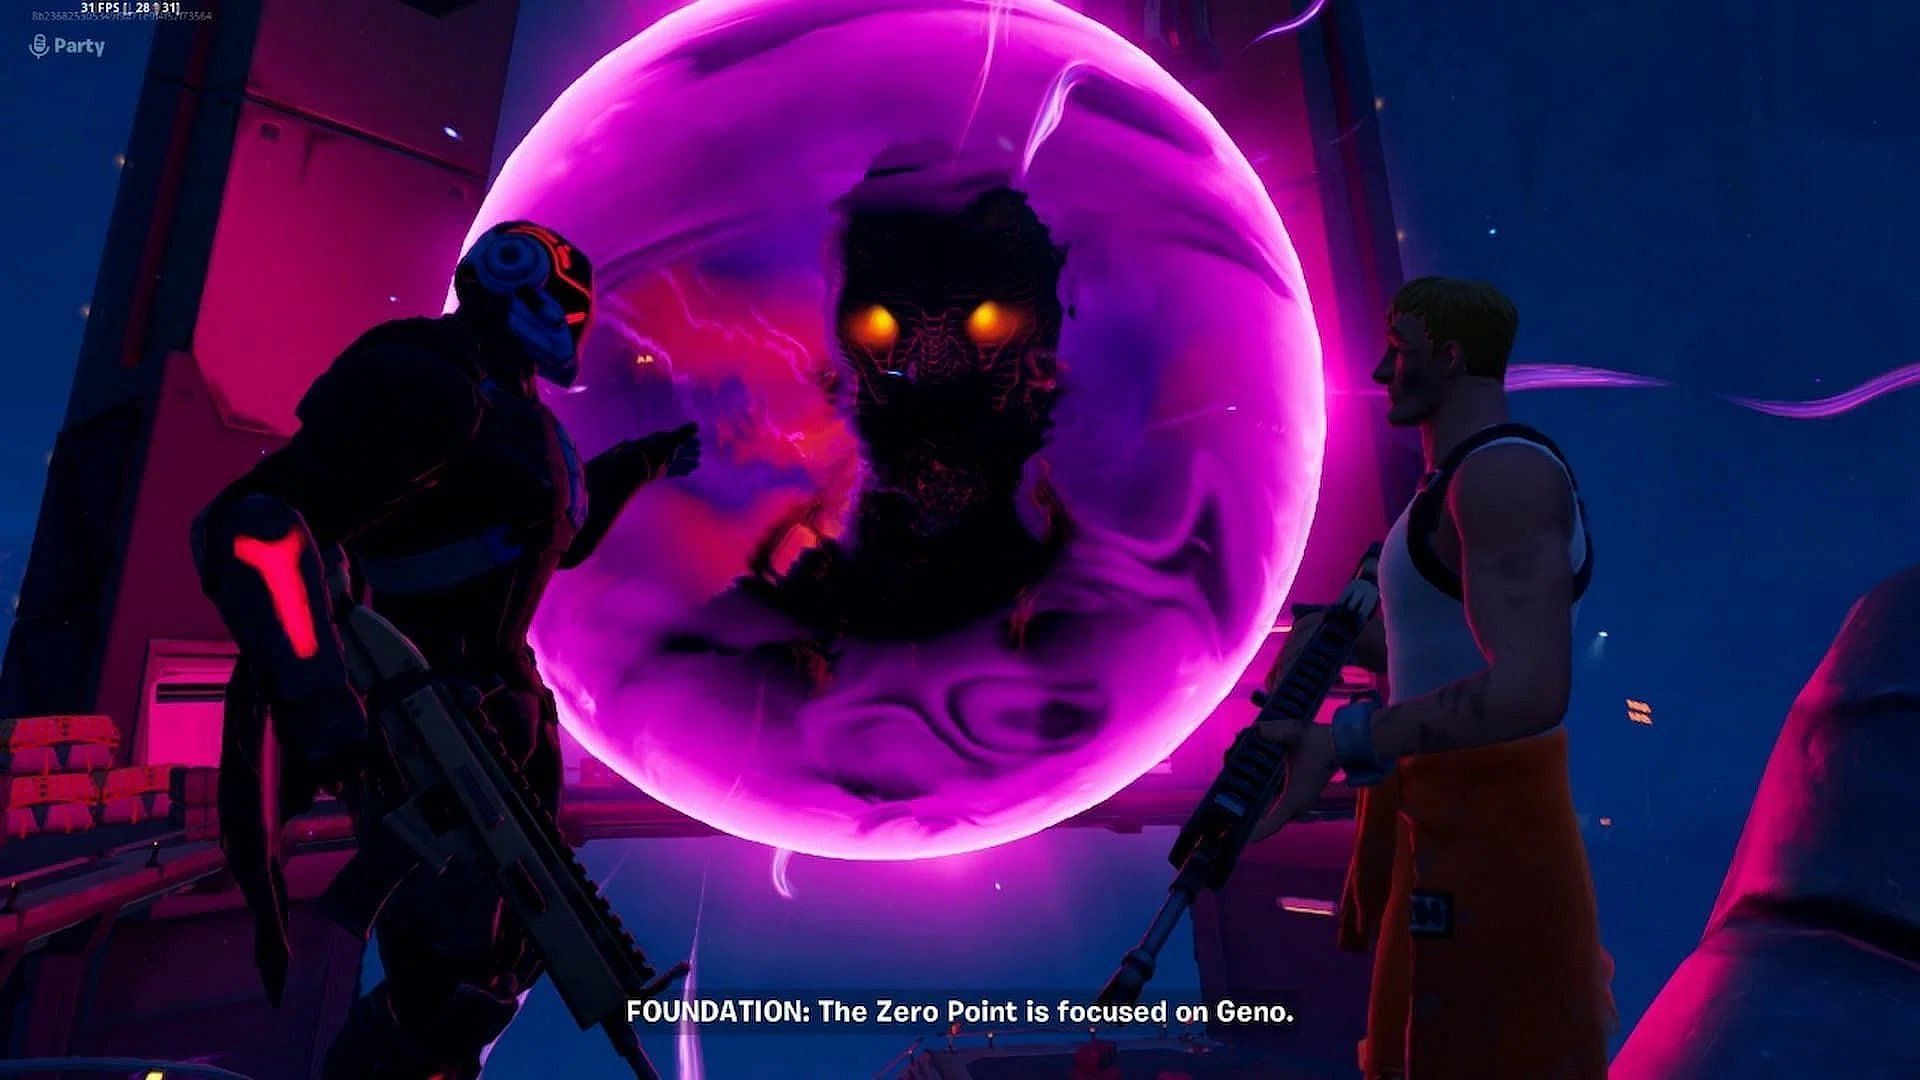 This Fortnite gamer possibly solved the Geno mystery (Image via Epic Games)